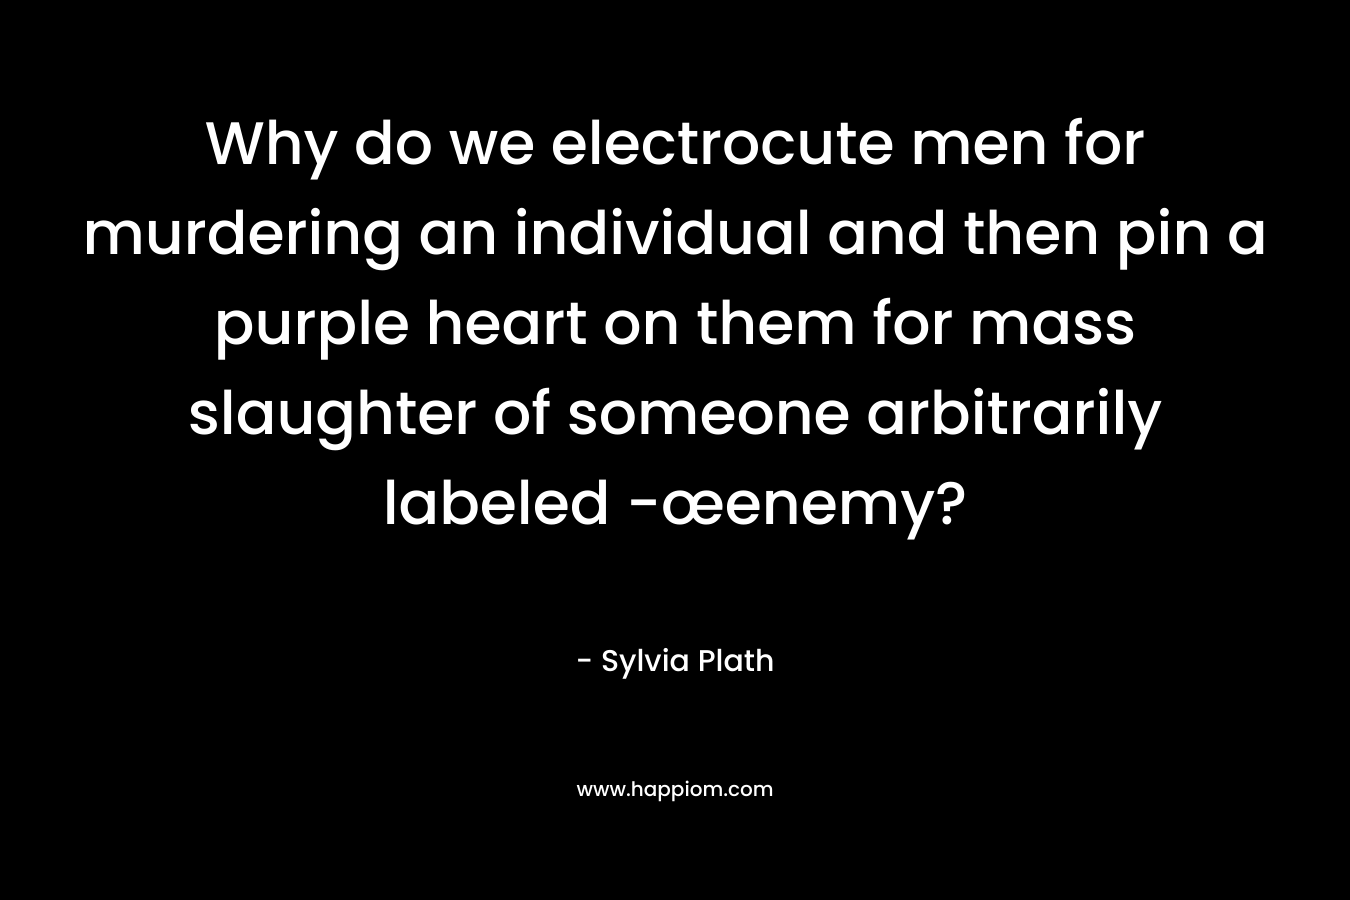 Why do we electrocute men for murdering an individual and then pin a purple heart on them for mass slaughter of someone arbitrarily labeled -œenemy? – Sylvia Plath